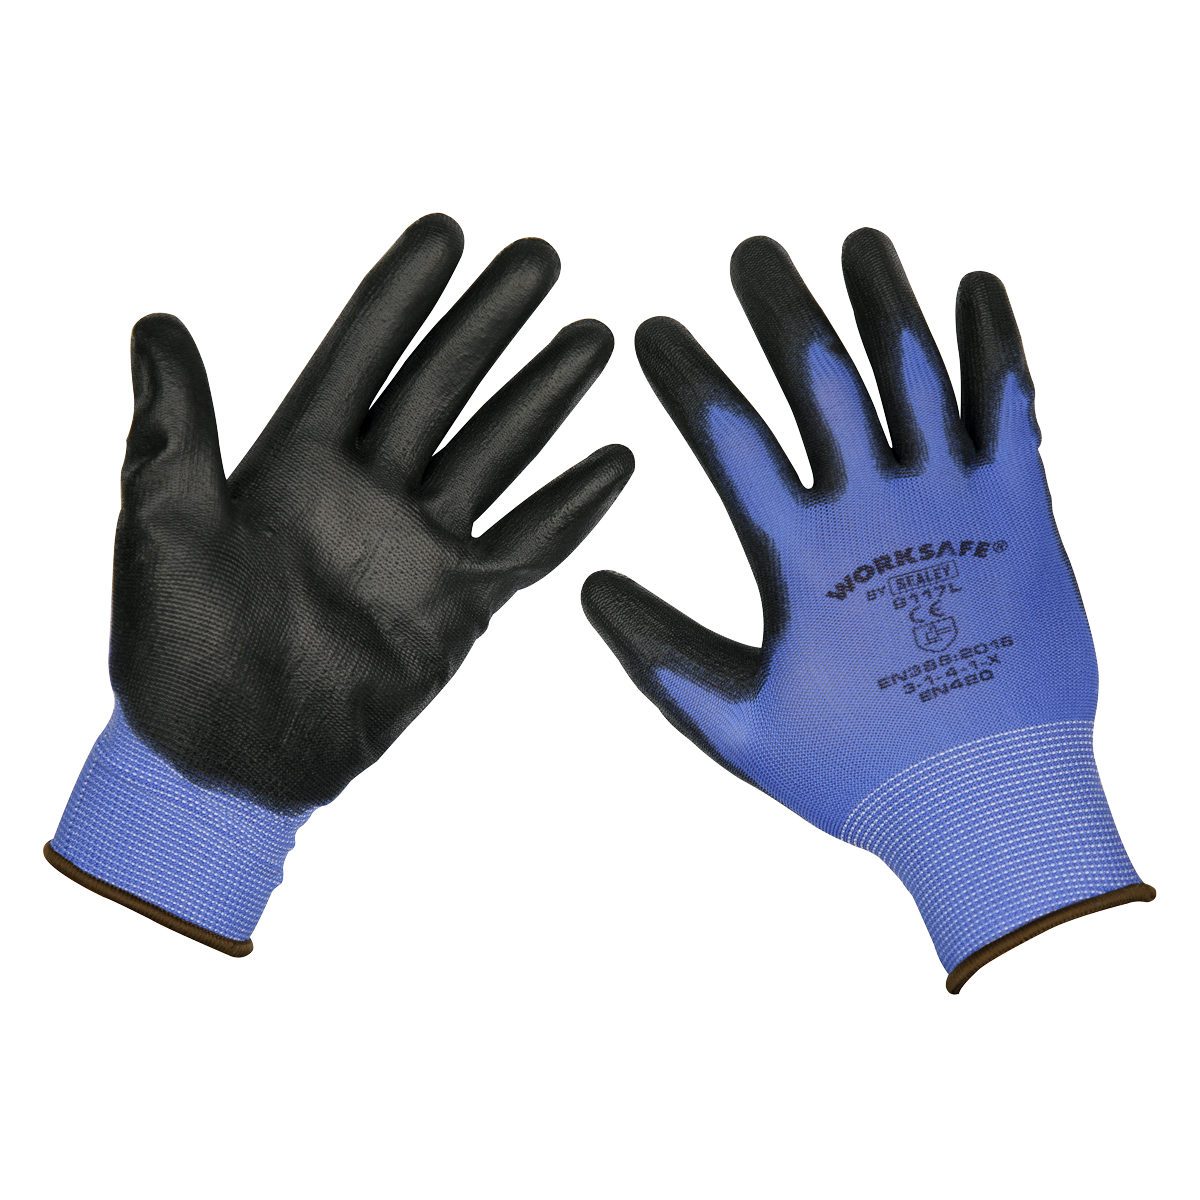 Lightweight Precision Grip Gloves (Large) - Pack of 12 Pairs - 9117L/12 - Farming Parts